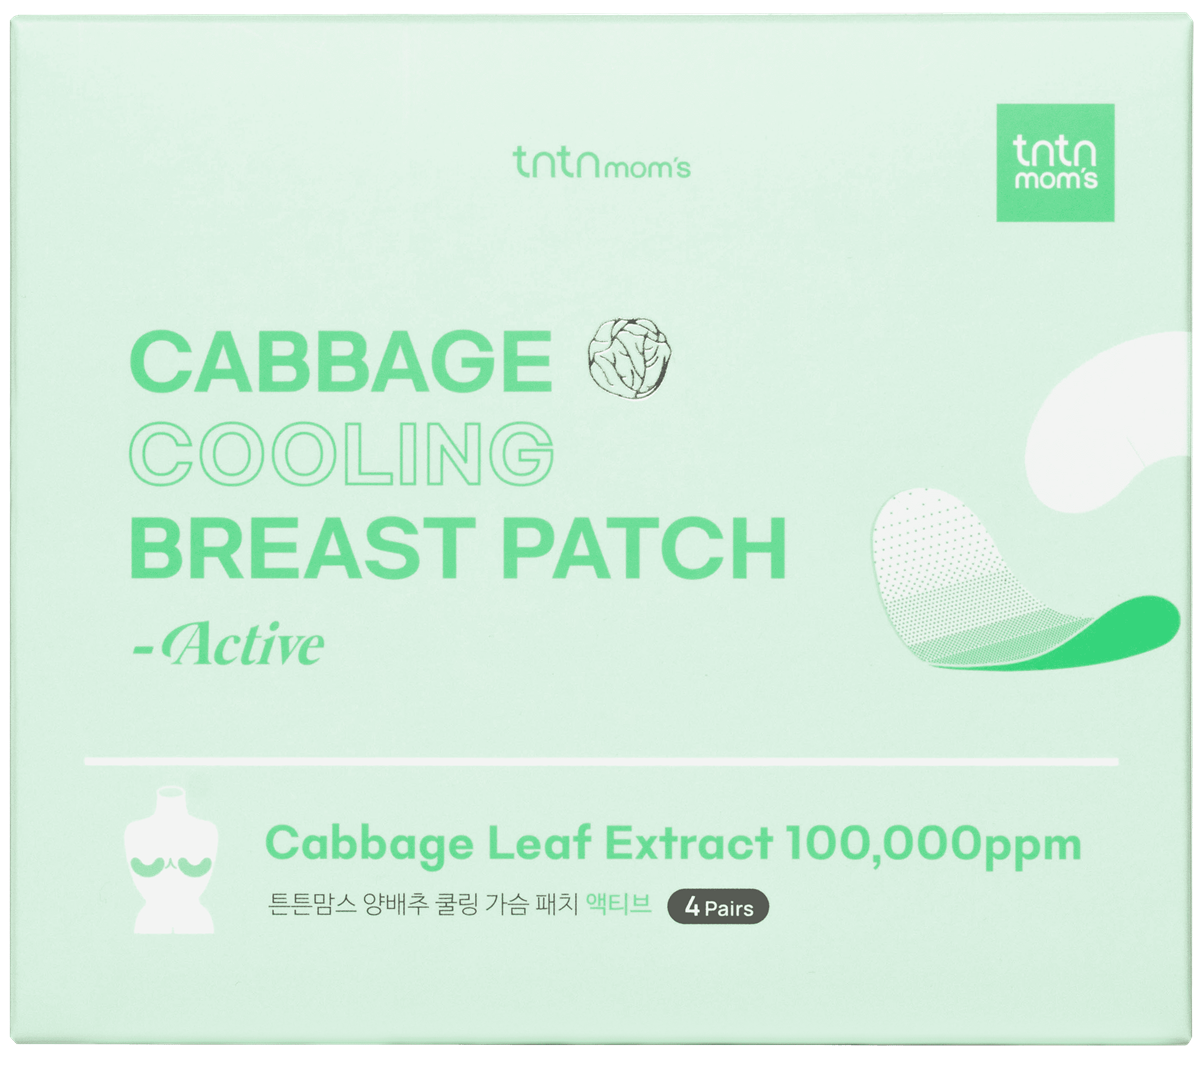 tntnmom_s Cabbage cooling breast patch ACTIVE